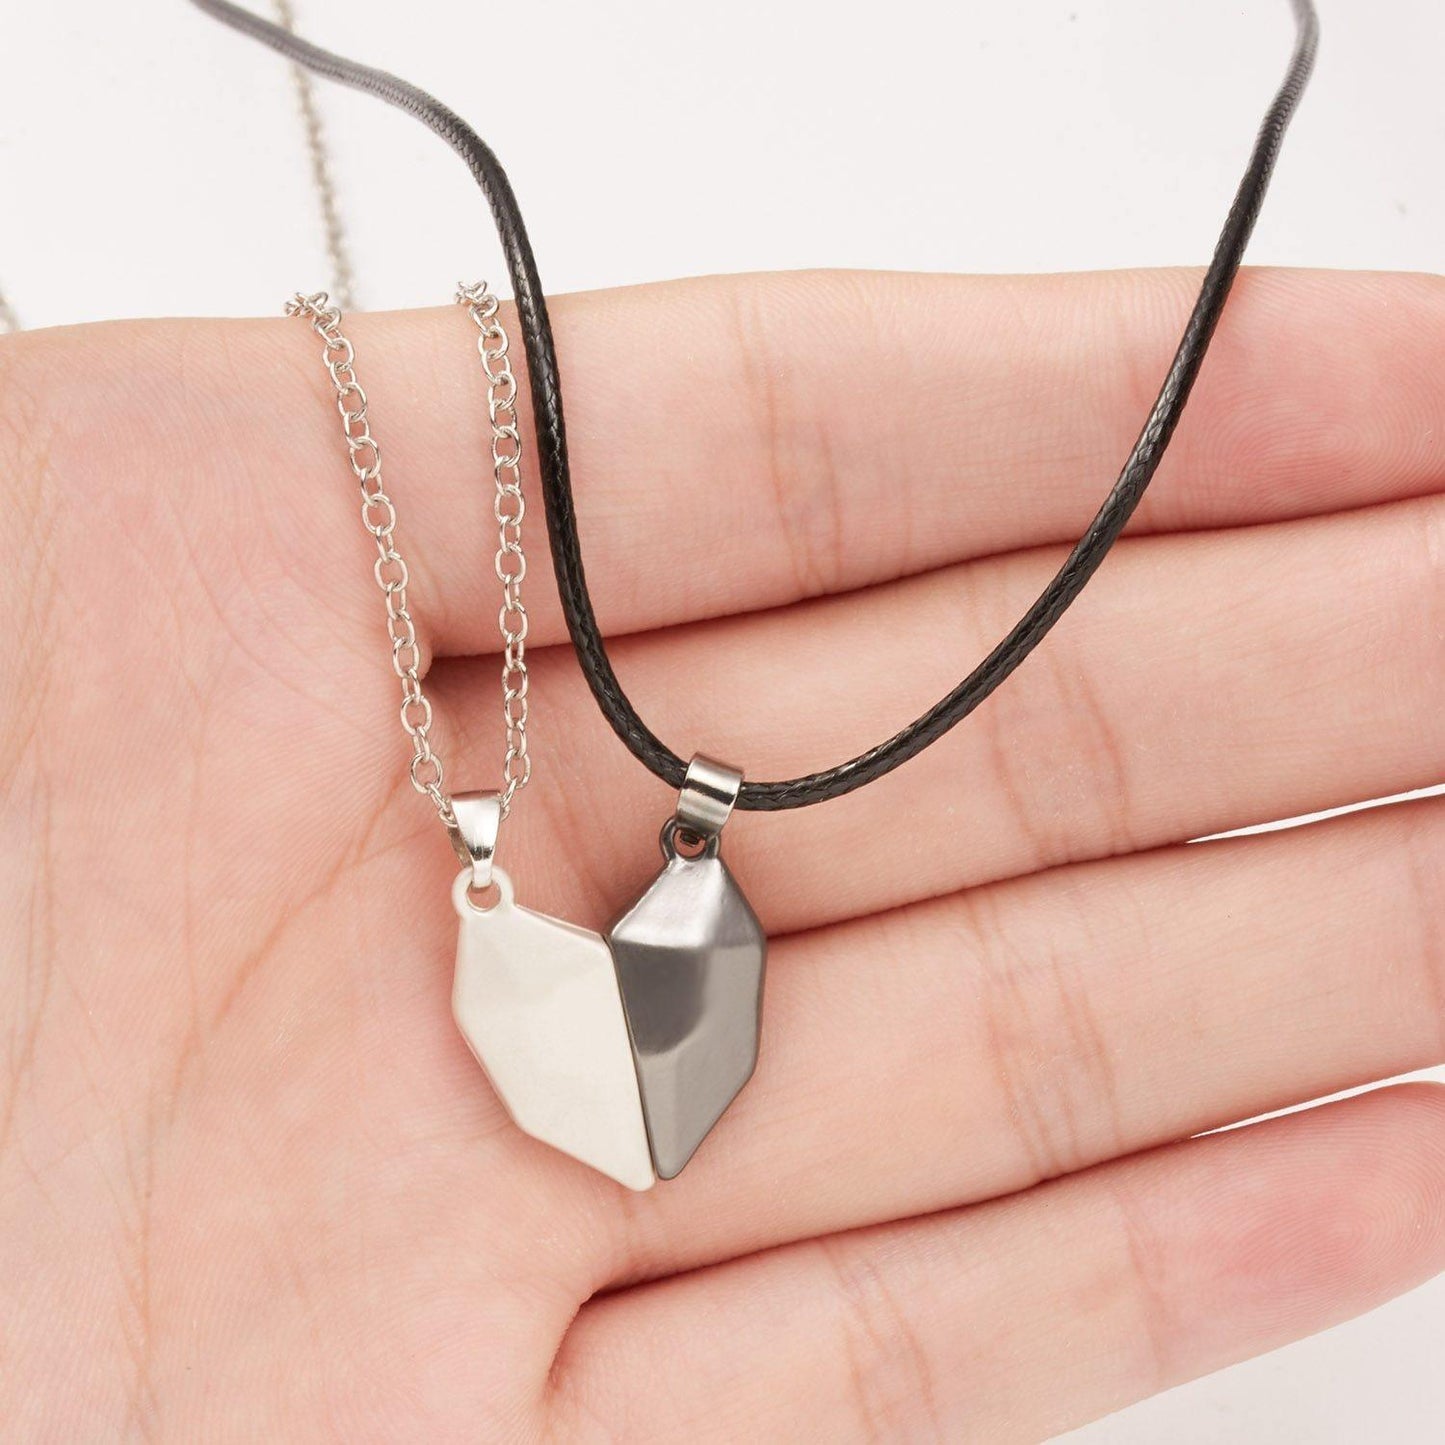 Couple Pendant Necklaces Gift To My Girlfriend in 2023 | Couple Pendant Necklaces Gift To My Girlfriend - undefined | gift ideas, Magnetic Couple Necklace, necklace, Necklaces | From Hunny Life | hunnylife.com